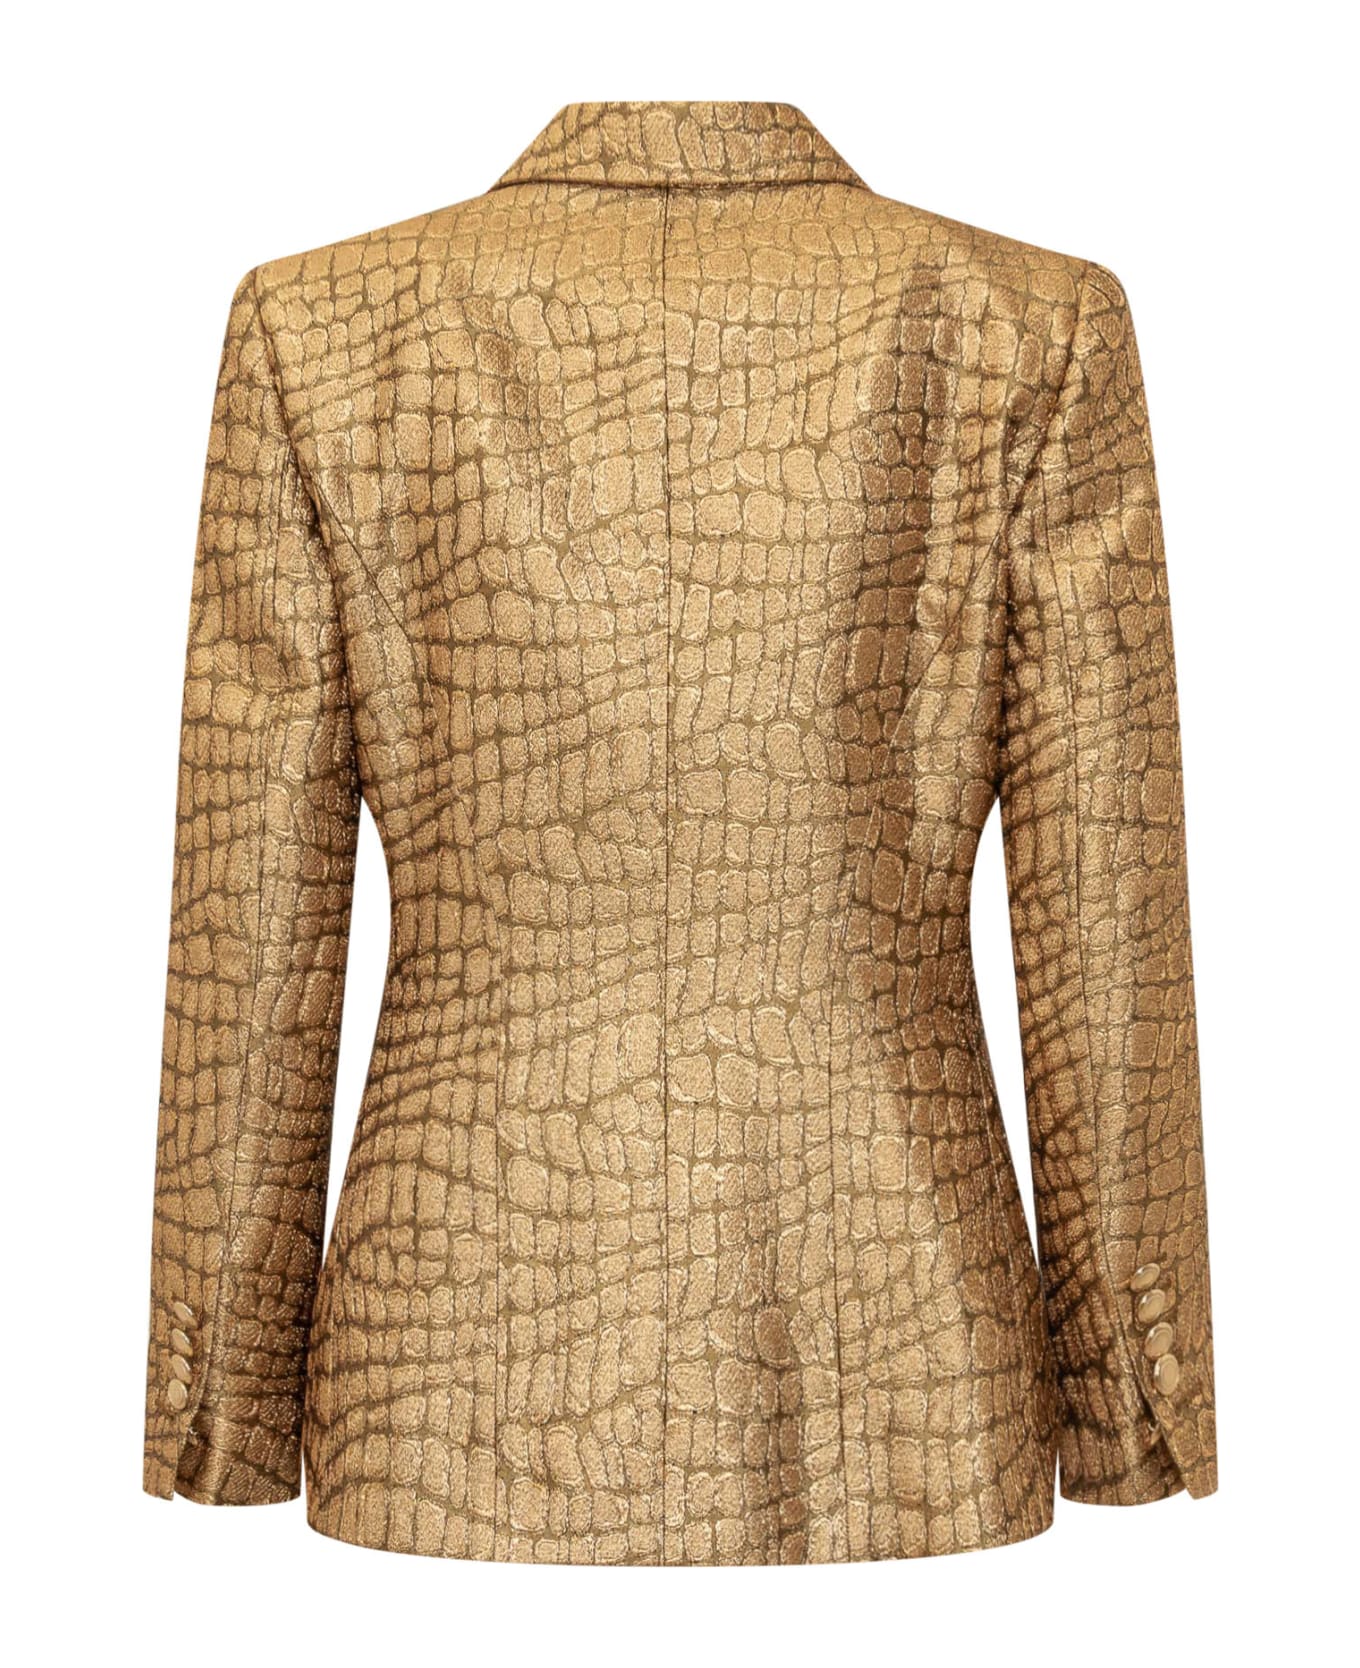 Tom Ford Wallis Single-breasted One Button Jacket - Animalier